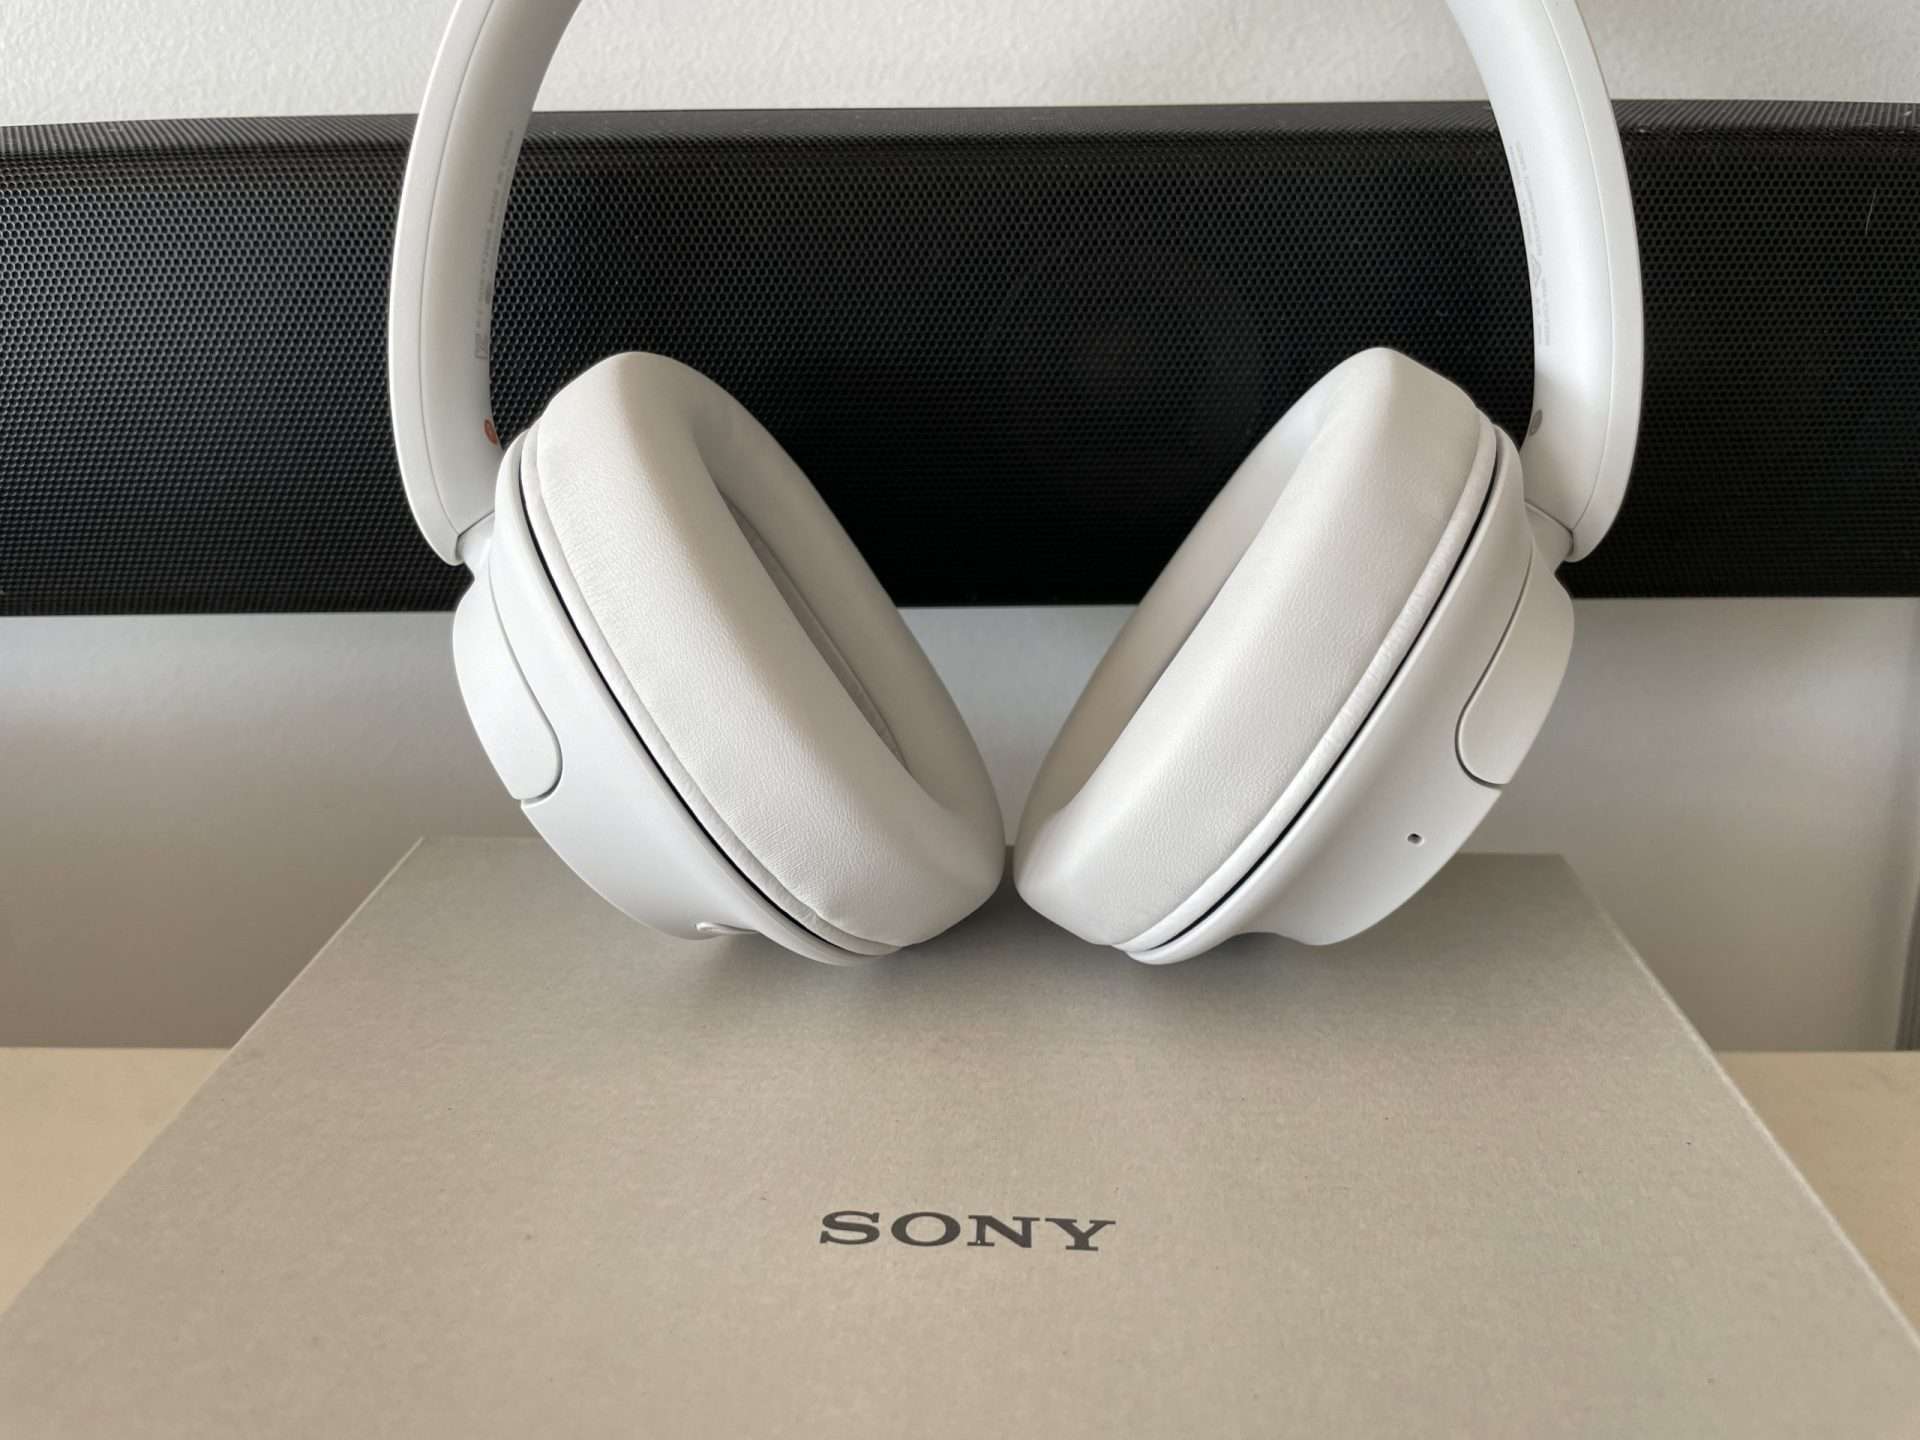 How To Hook Up Sony Bluetooth Headphones Noise Cancellation